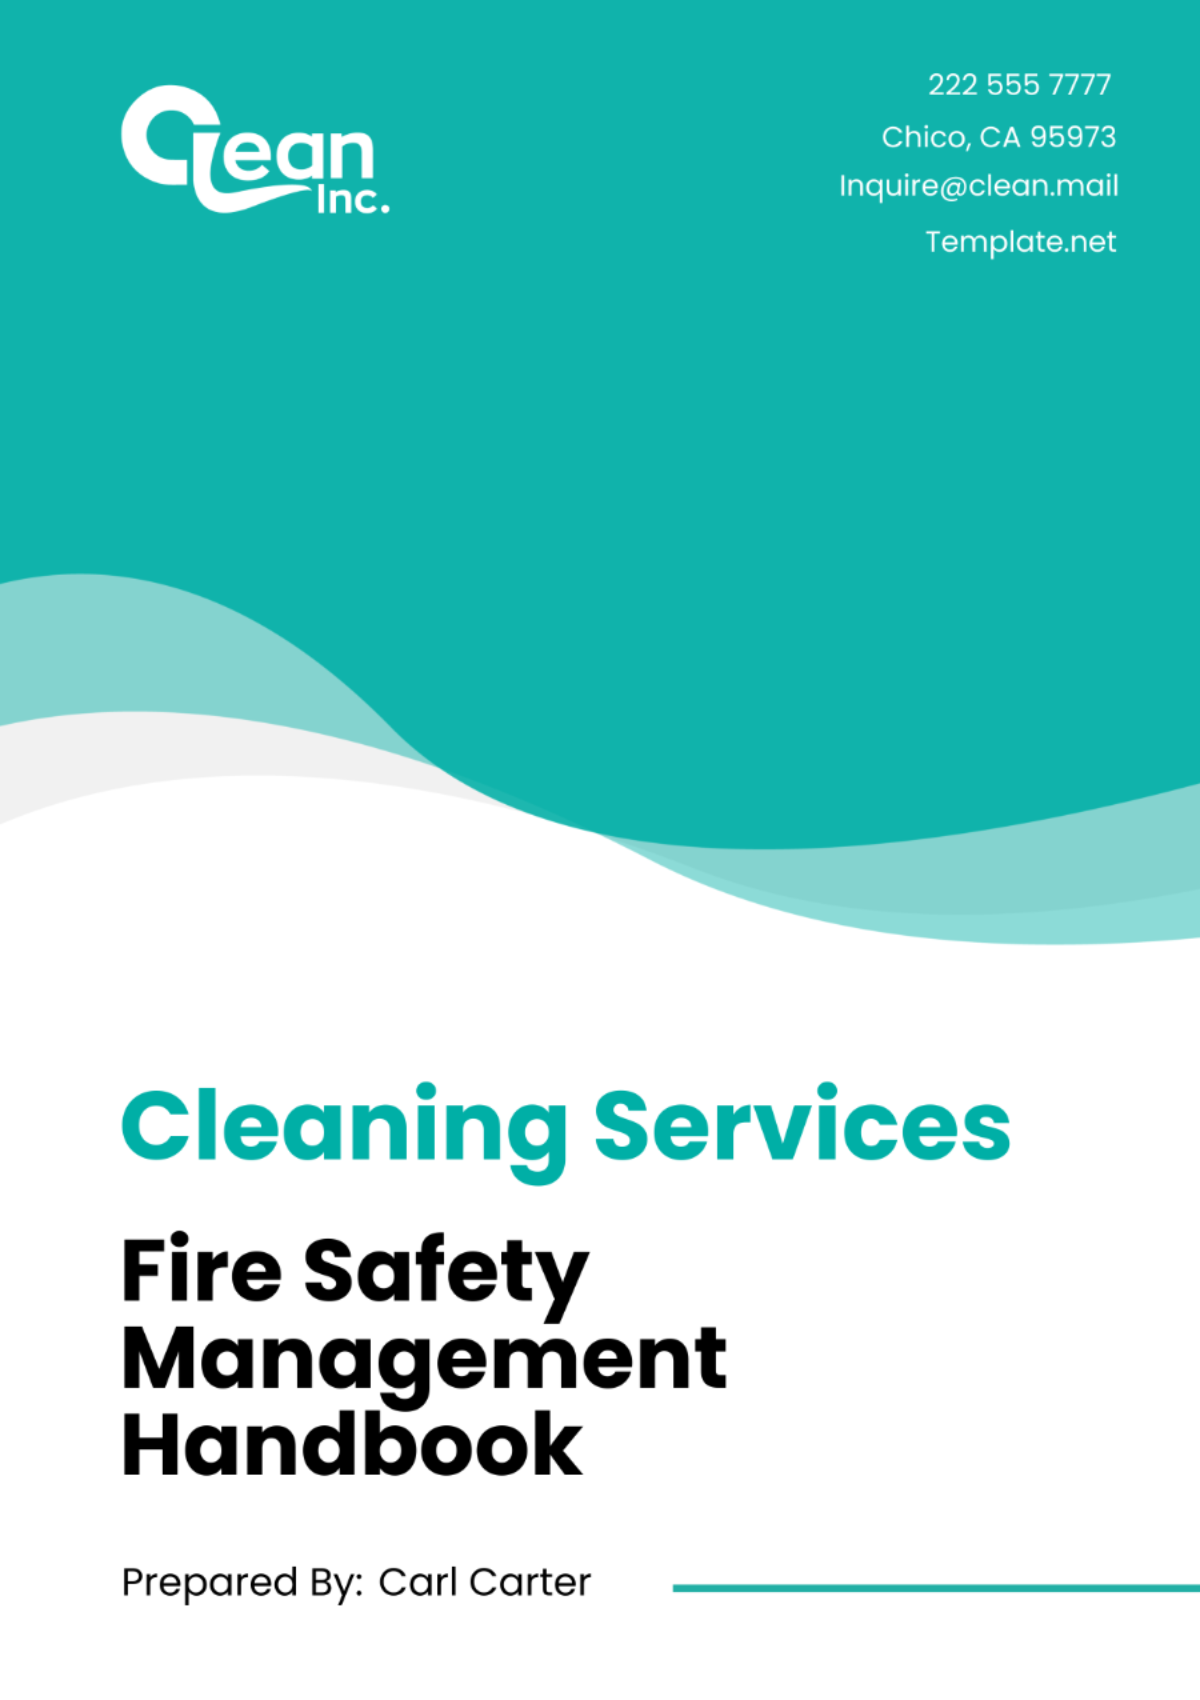 Cleaning Services Fire Safety Management Handbook Template